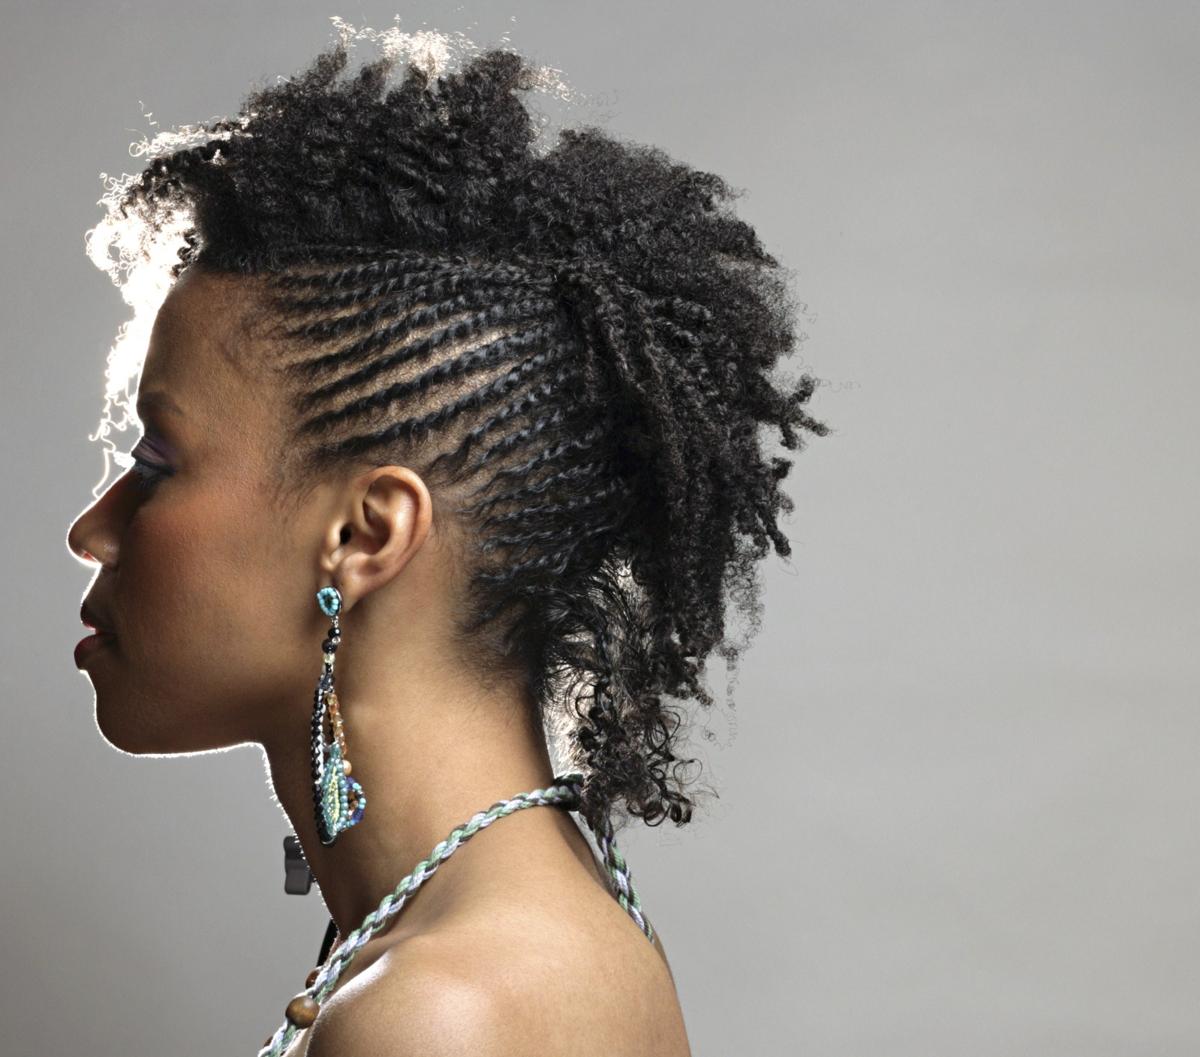 African-American Hair Braiding Styles You'll Surely Want to Try